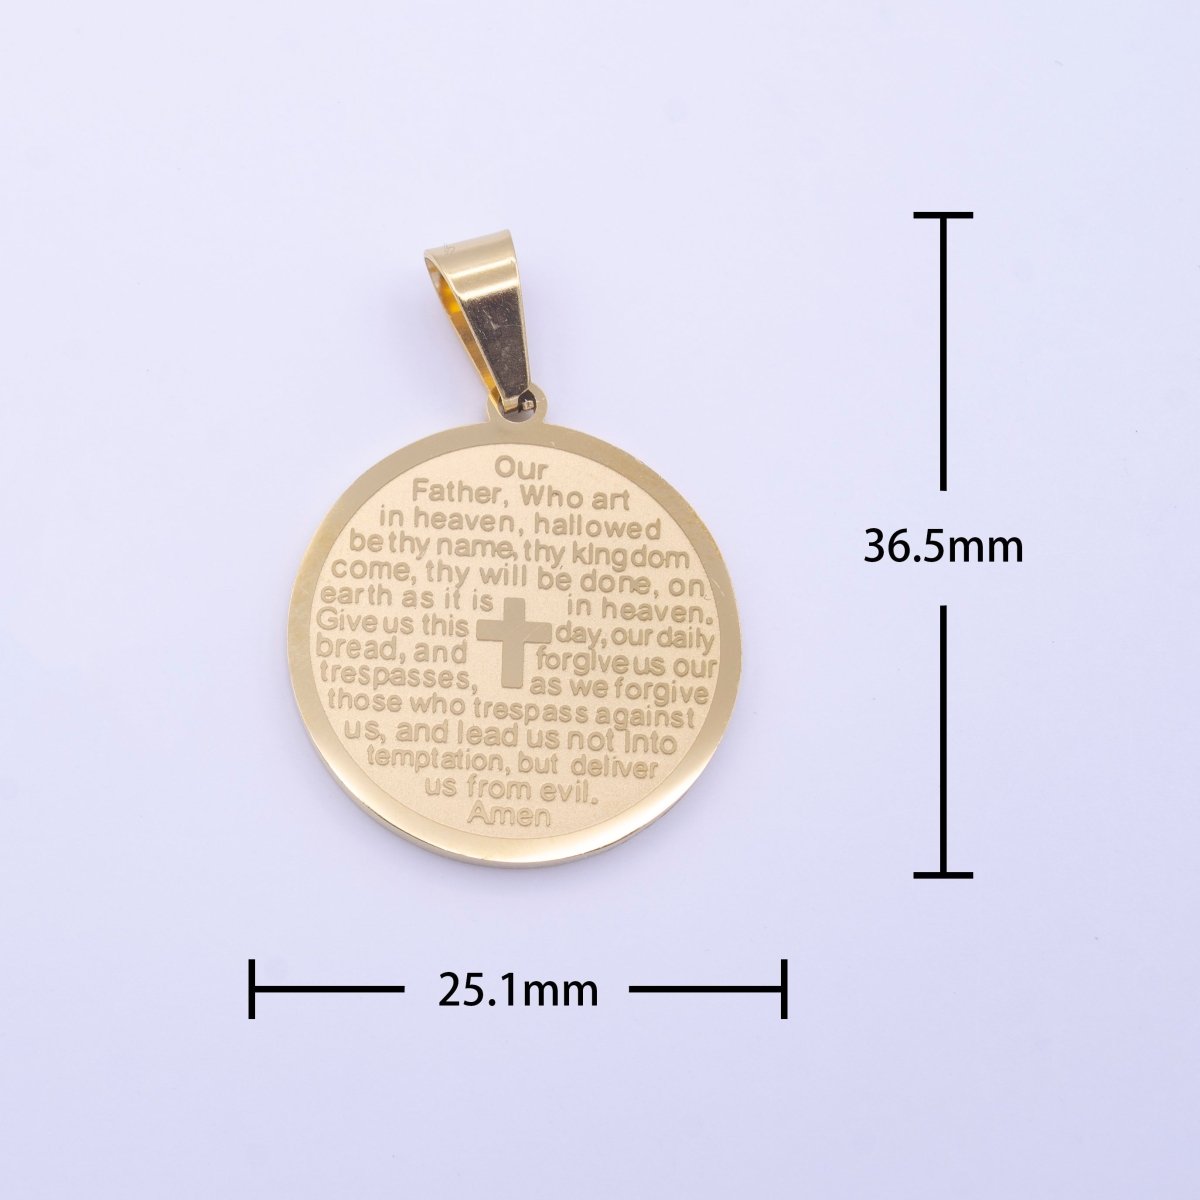 Stainless Steel Our Father Lord's Prayer English Engraved Pendant For Religious Wholesale Jewelry J-792 - DLUXCA